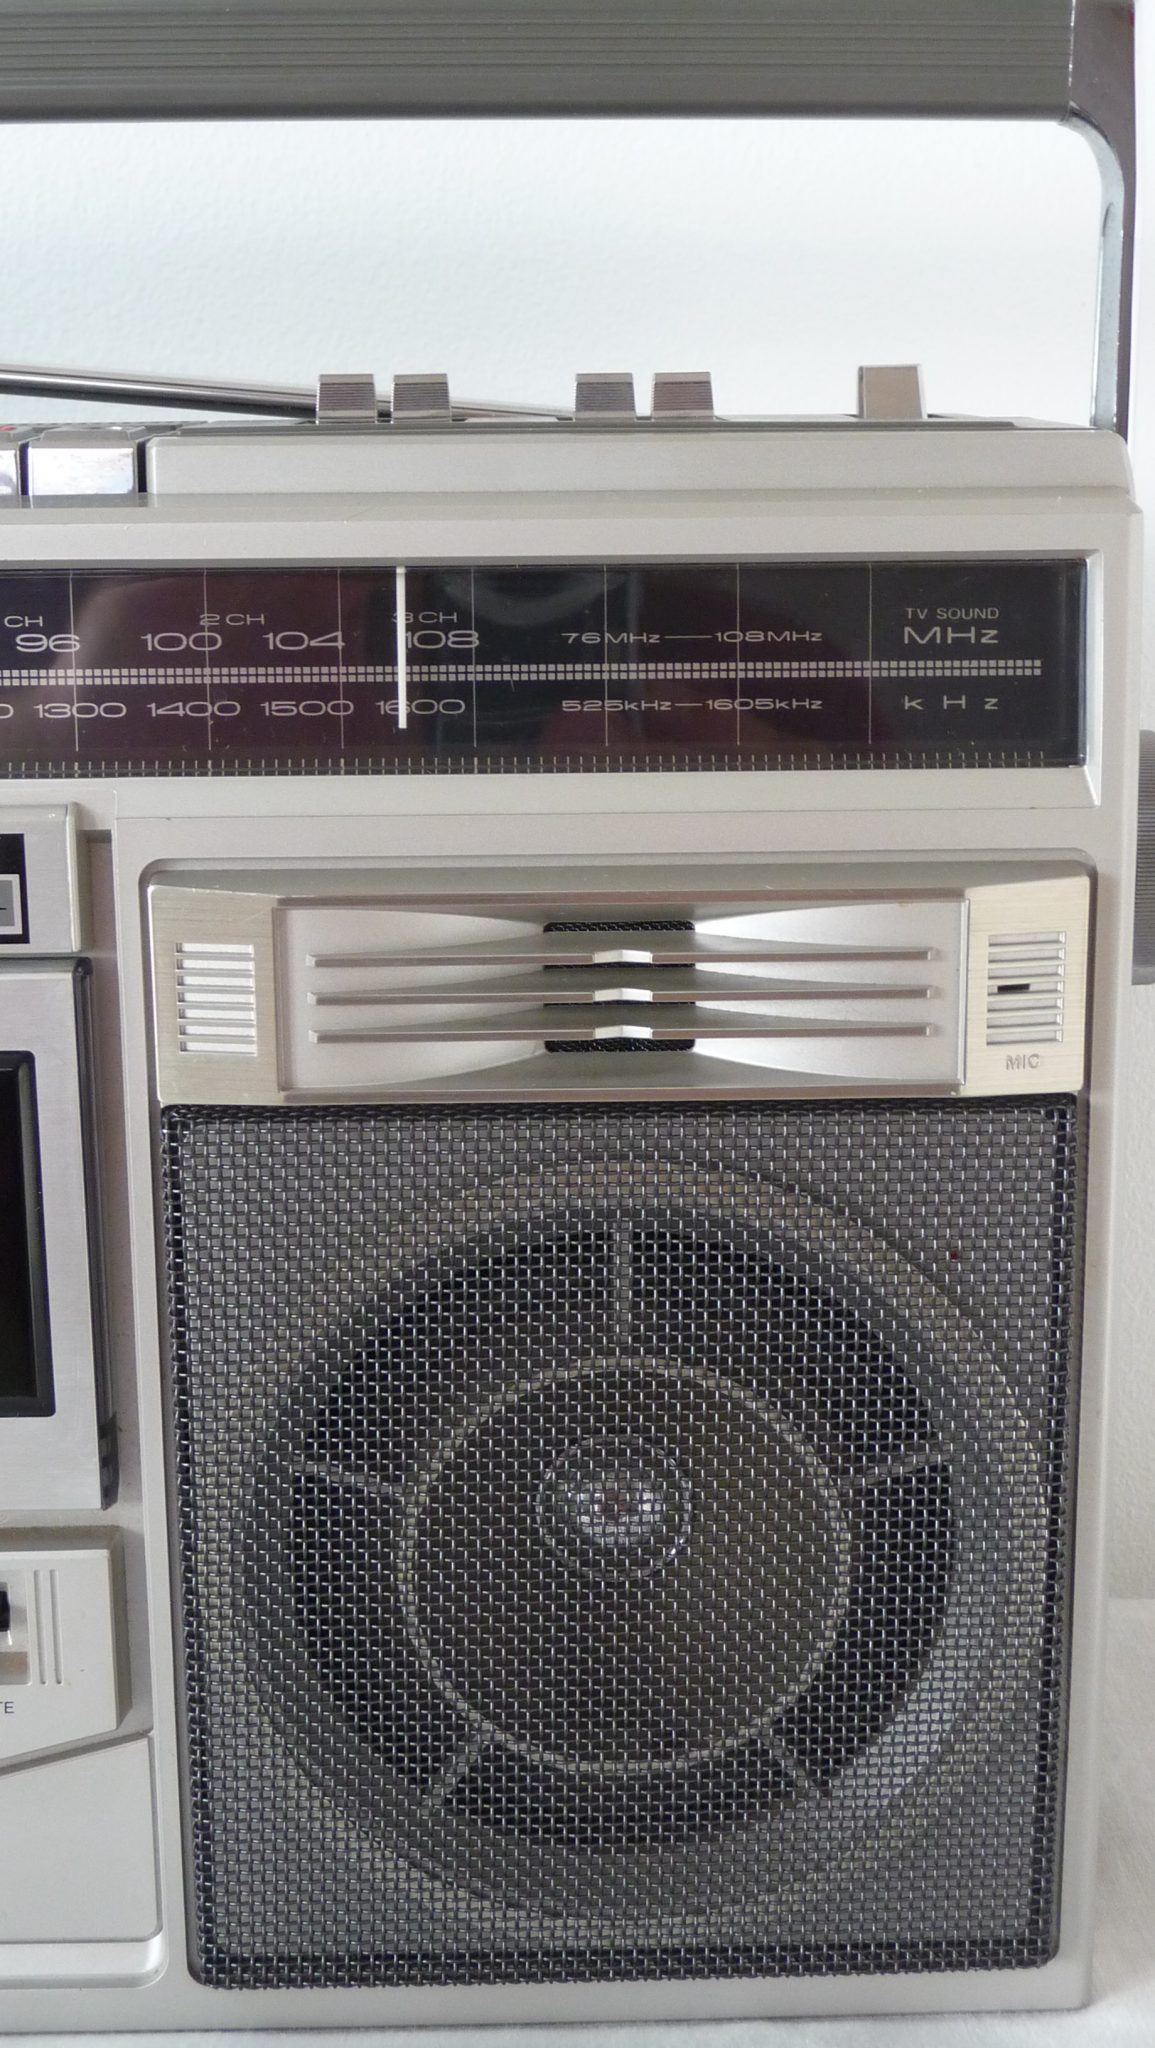 NATIONAL RX-5280 Radio Cassette Boombox with Box - Old Boomboxes